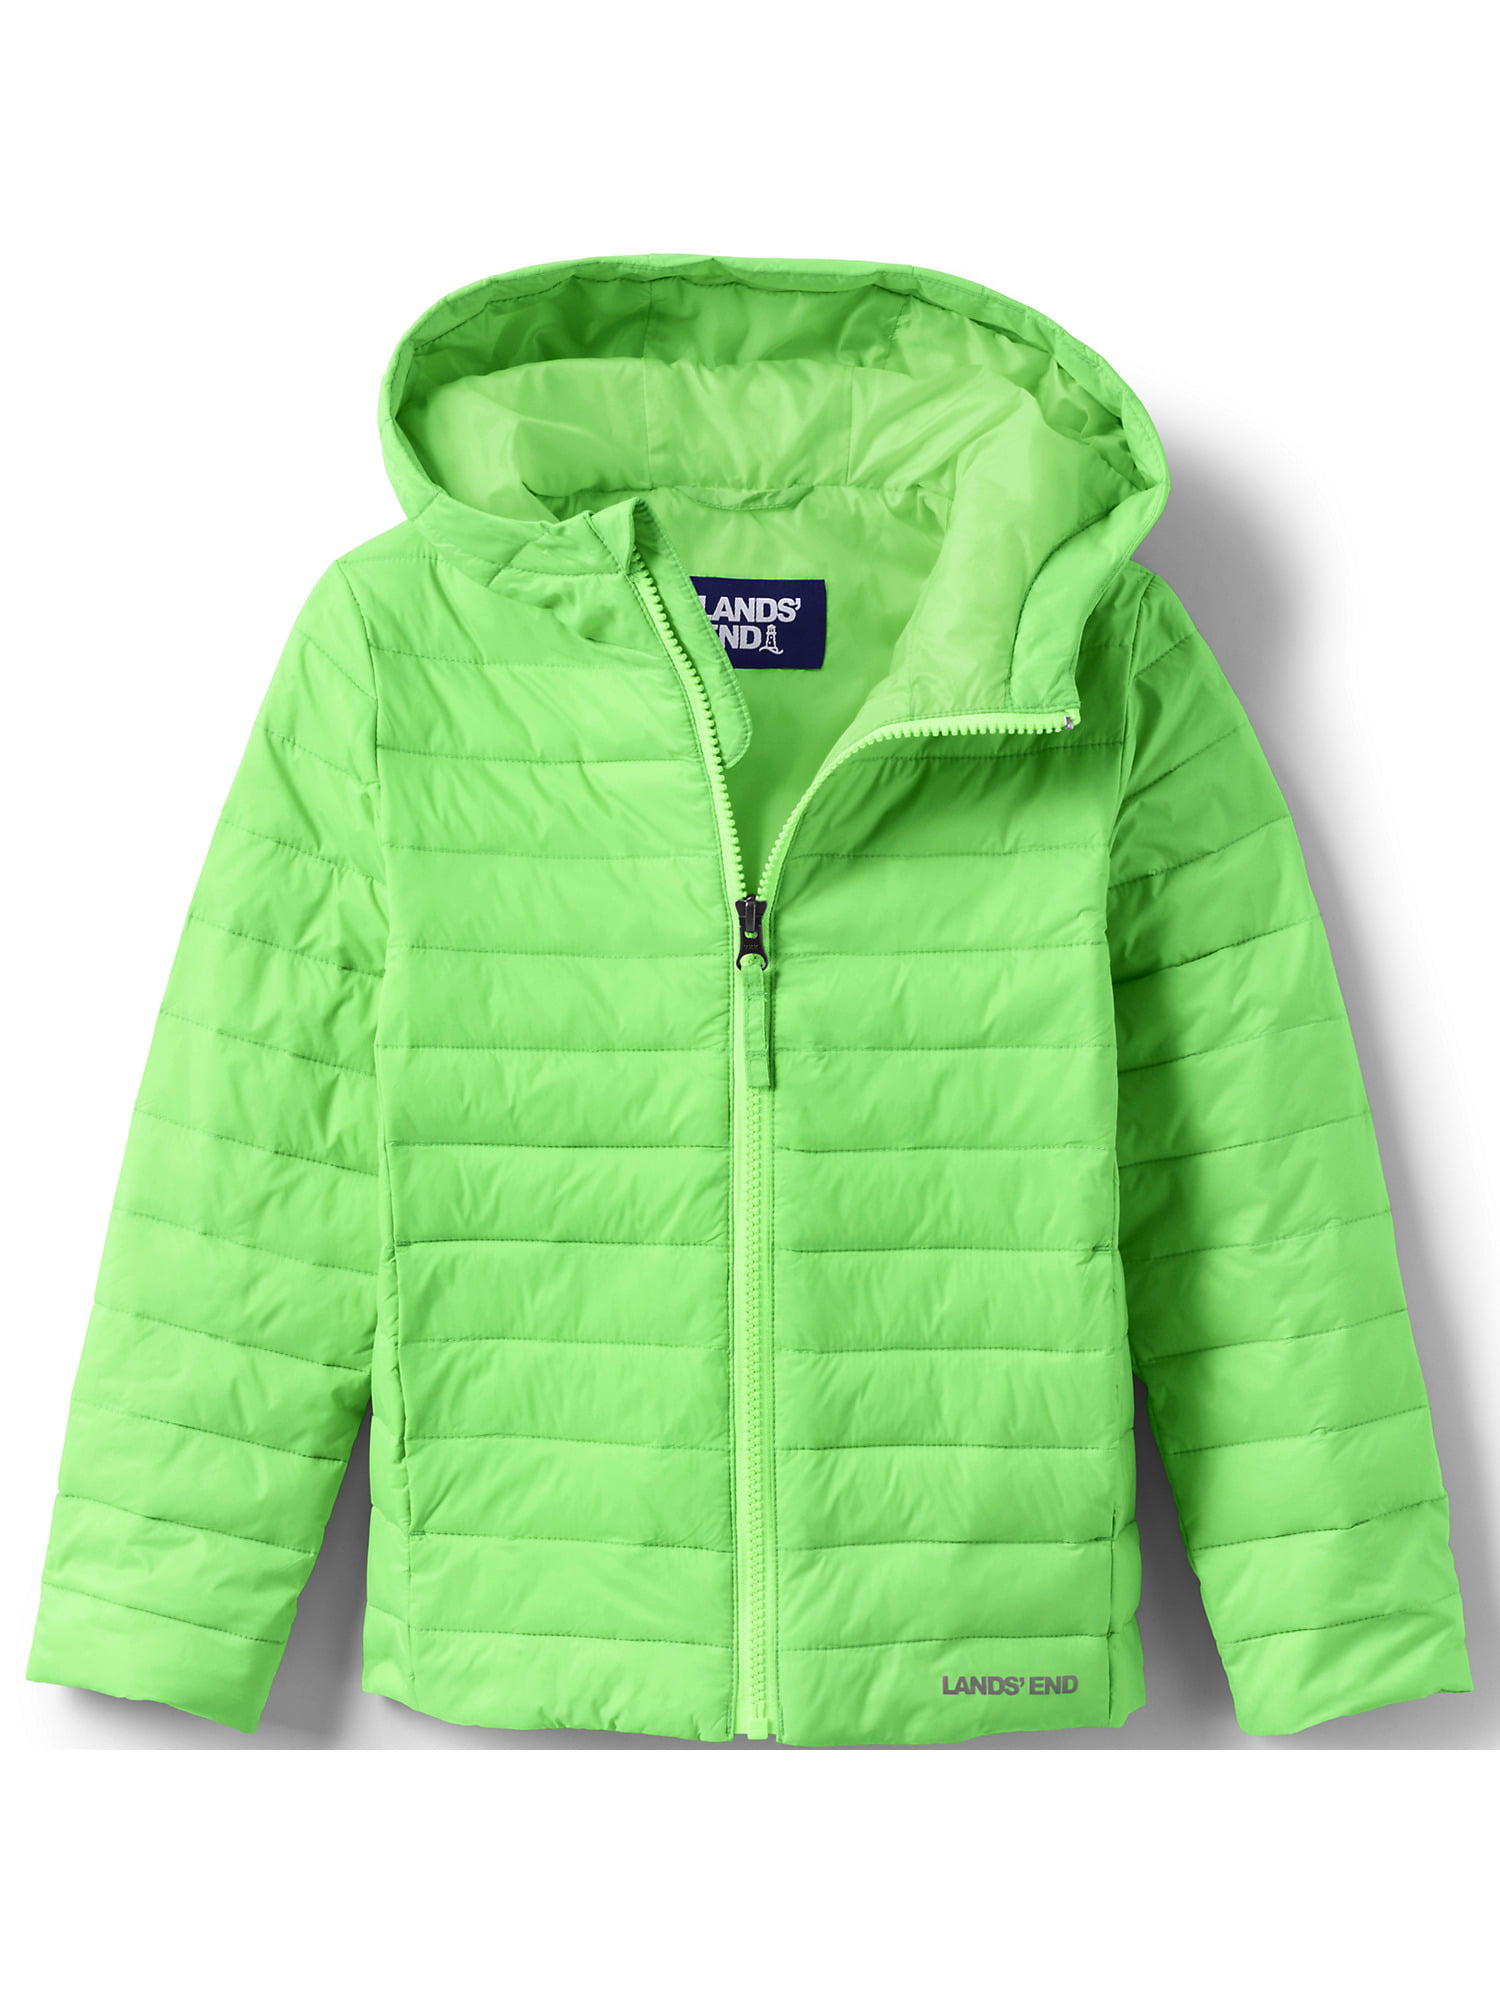 Lands' End Kids Husky ThermoPlume Packable Hooded Jacket